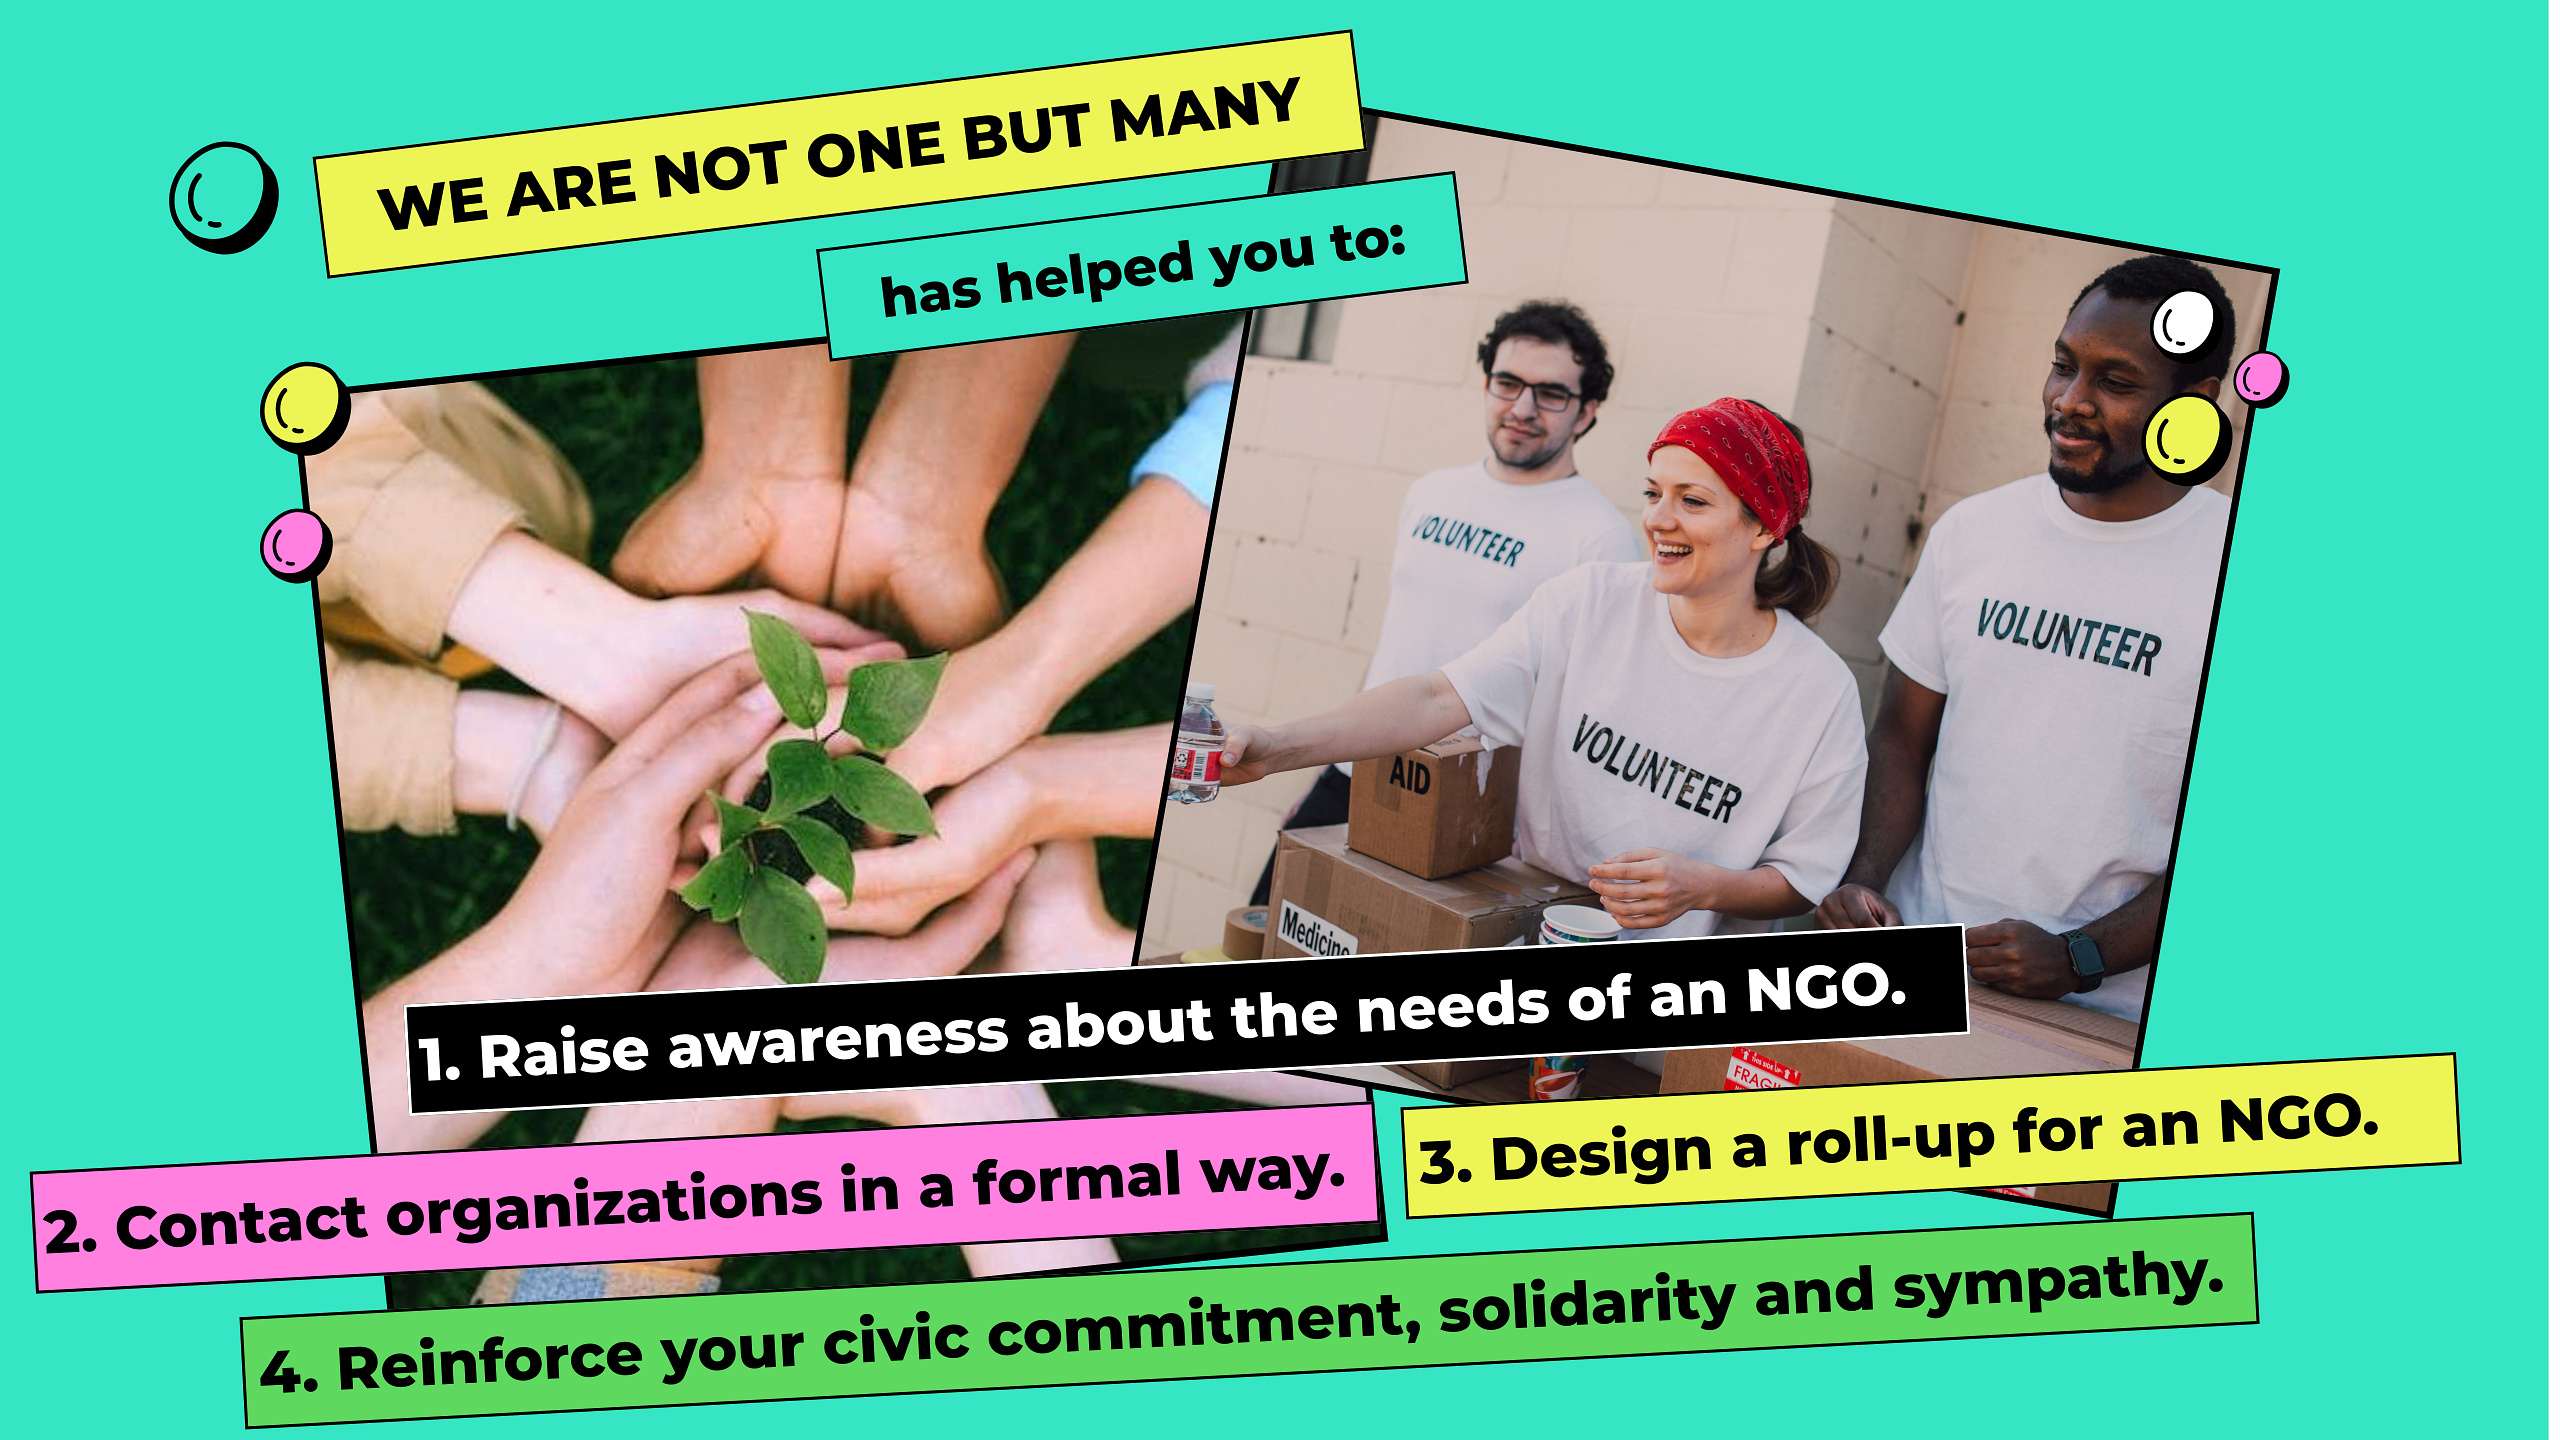 La imagen muestra dos imágenes que representan ONGs y cuatro frases. Has helped you to: 1. Raise awareness about the needs of an NGO. 2. Contact organizations in a formal way. 3. Design a roll-up for an NGO. 4. Reinforce your civic commitment, solidarity and sympathy.